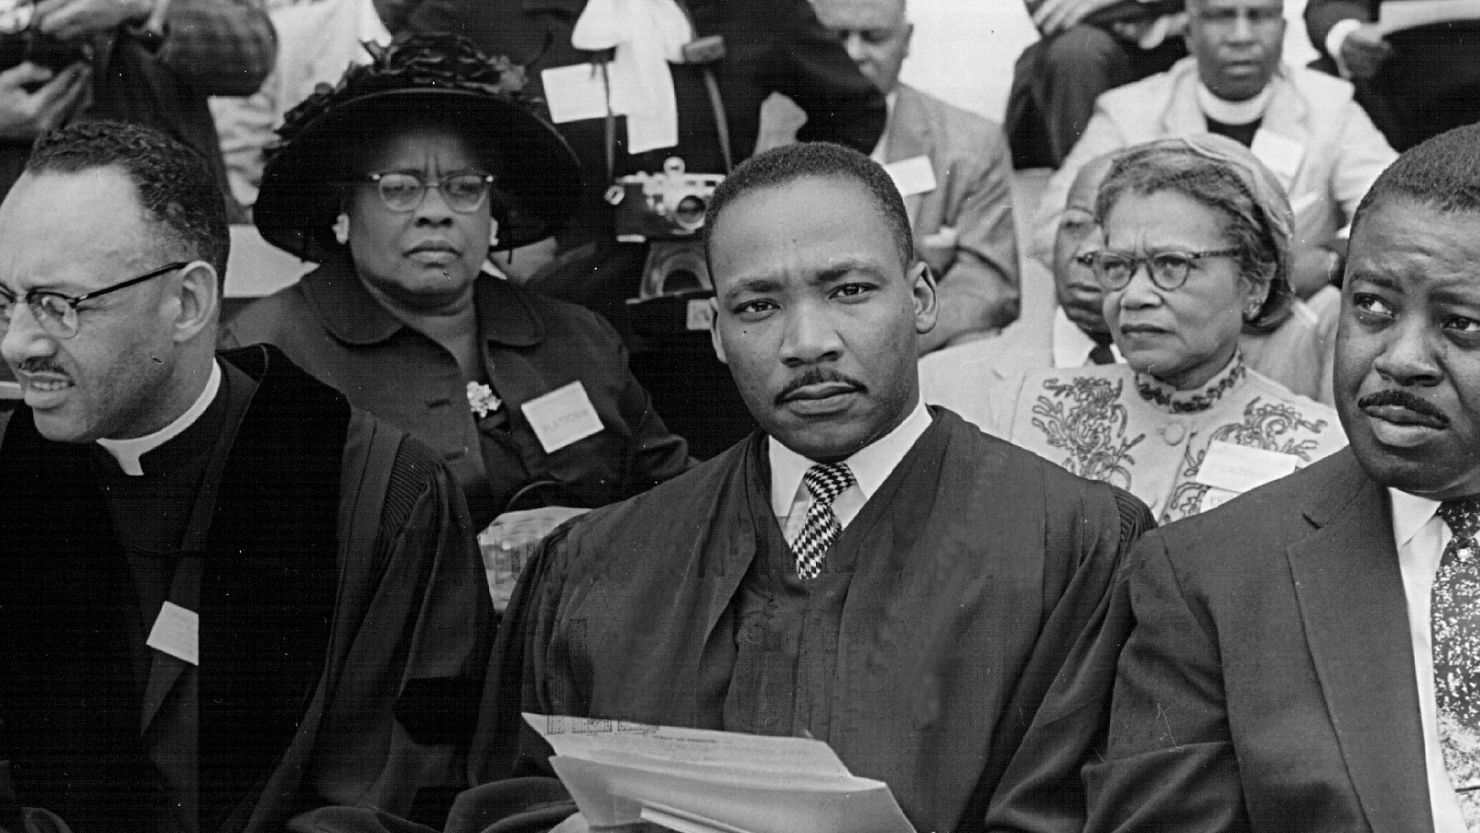 The Rev. Martin Luther King Jr. attends a prayer pilgrimage in 1957, the year he would co-found the SCLC.